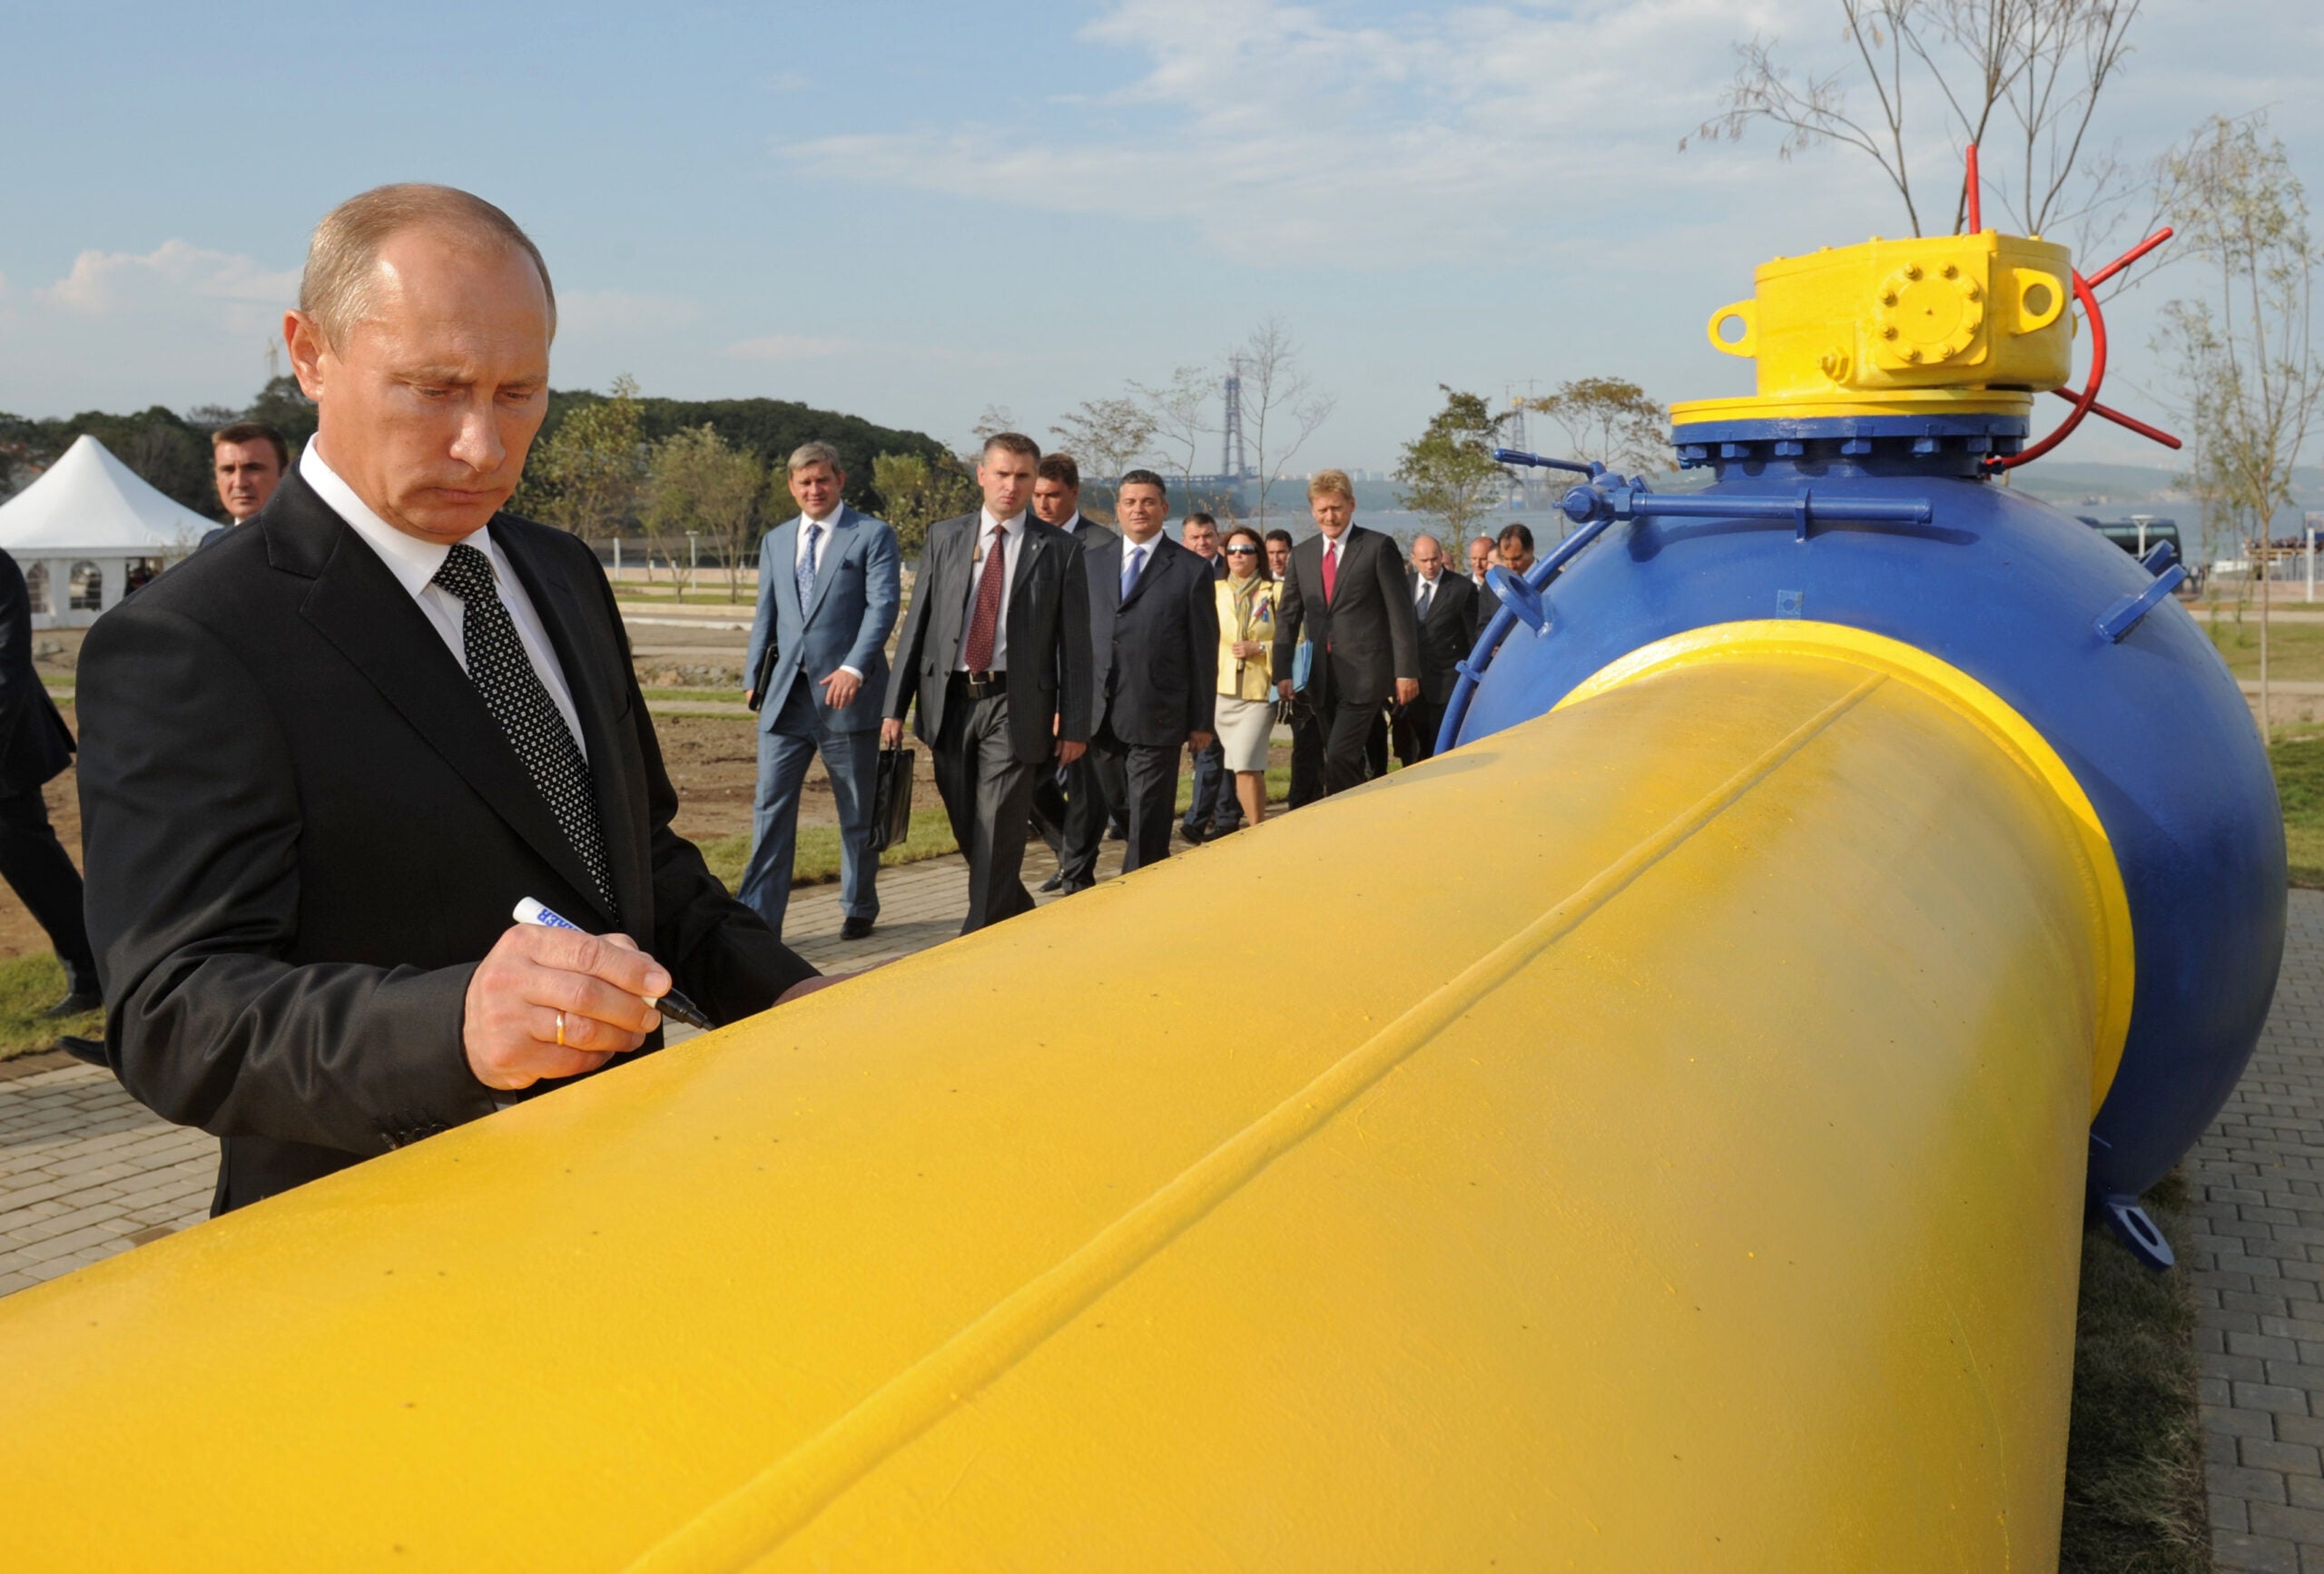 Will Russia fully engage with the geopolitics of clean energy?